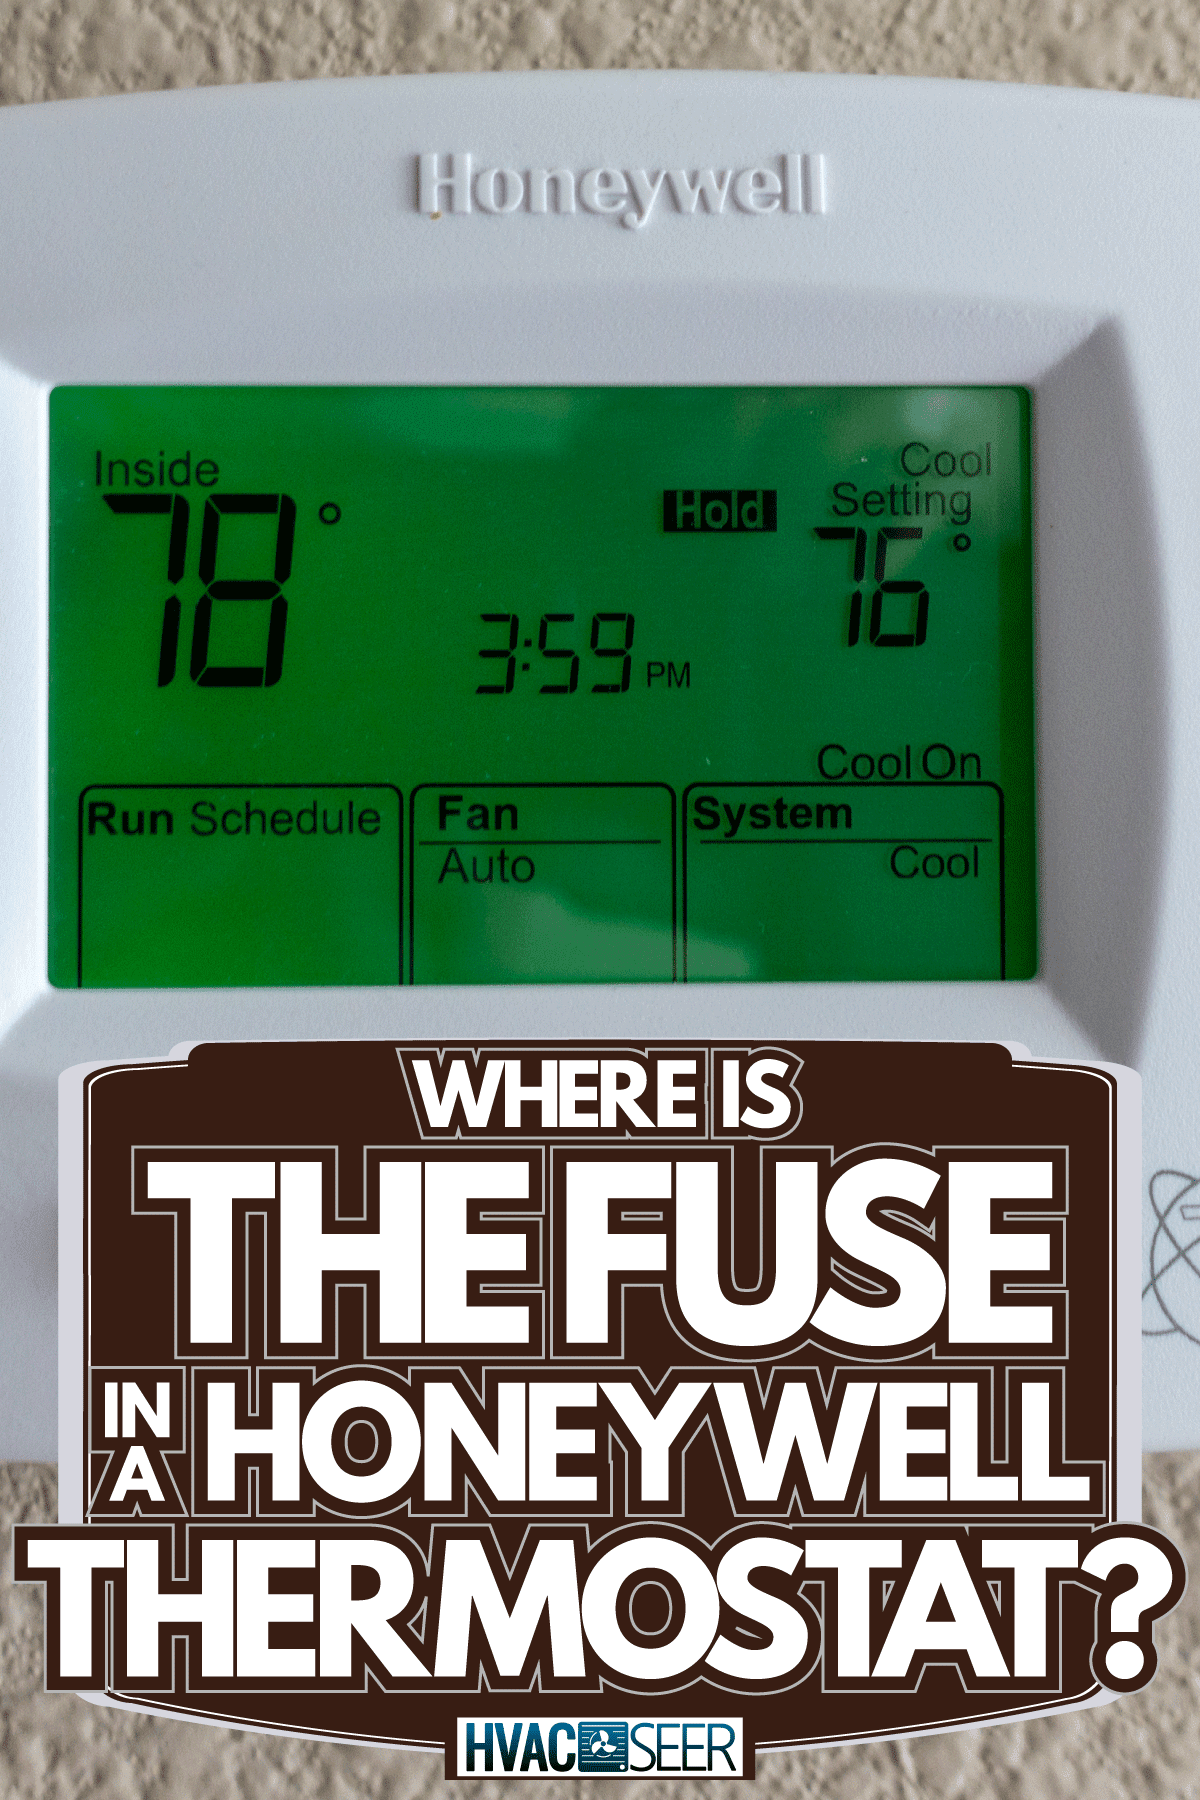 Honeywell programmable thermostat to control the air conditioner and heater in a home, Where Is The Fuse In A Honeywell Thermostat?